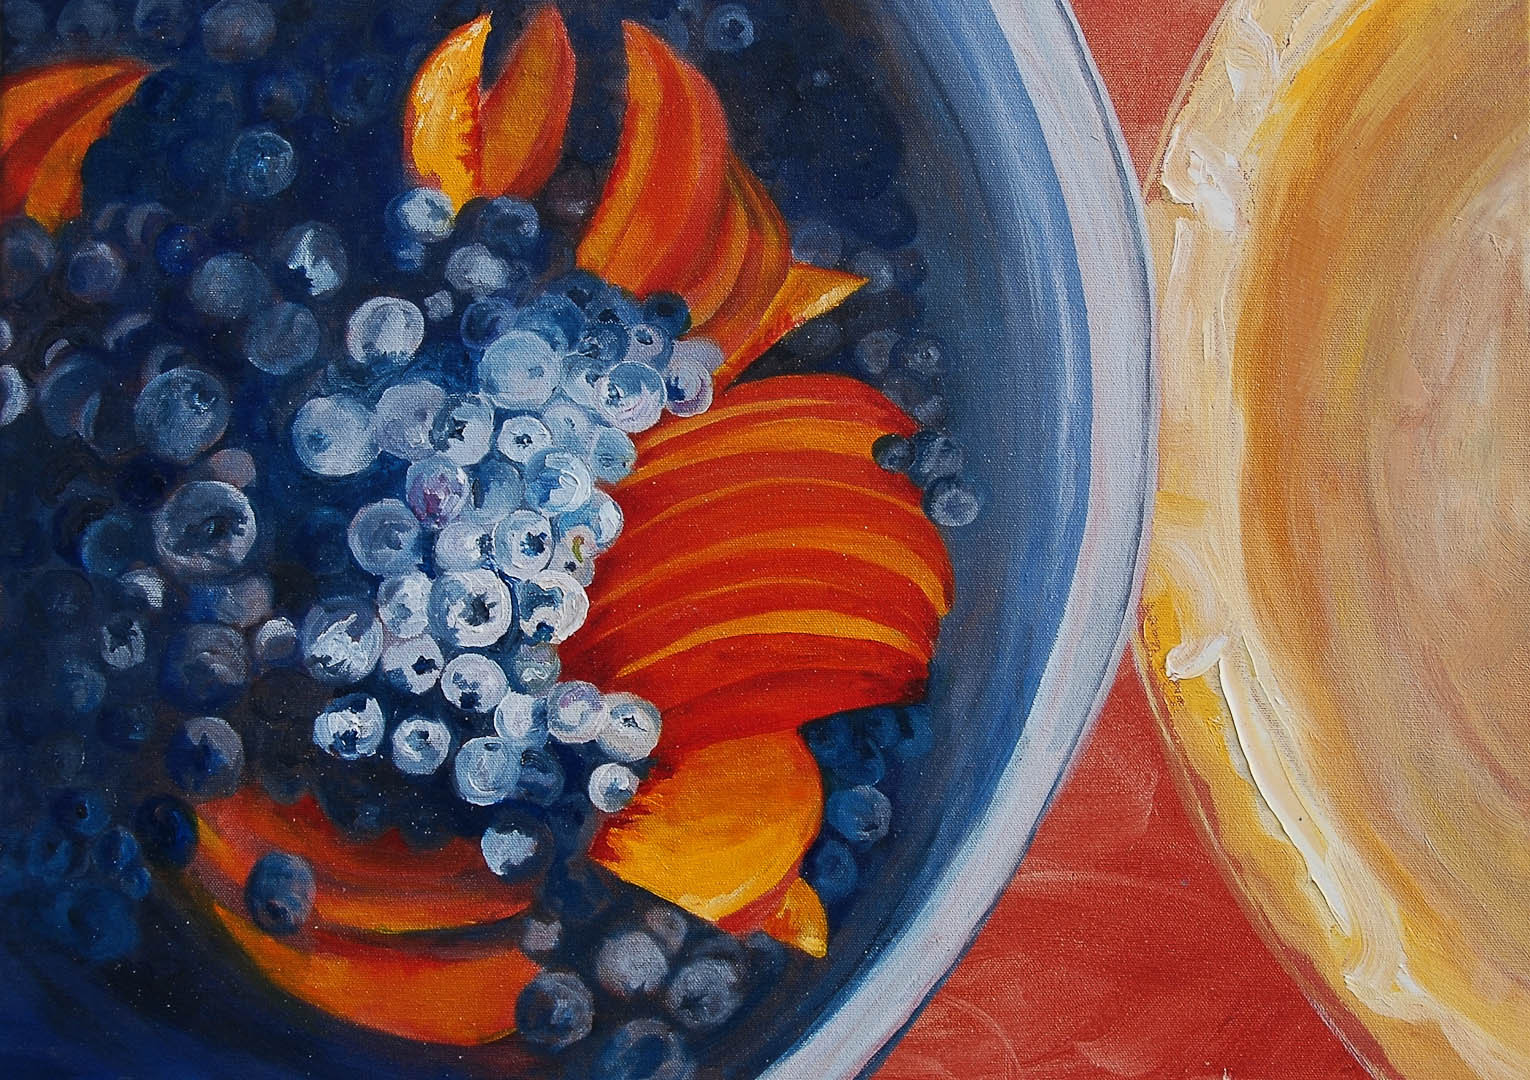 01 Blueberry Pie, Oil on canvas. 18" x 24" (sold)